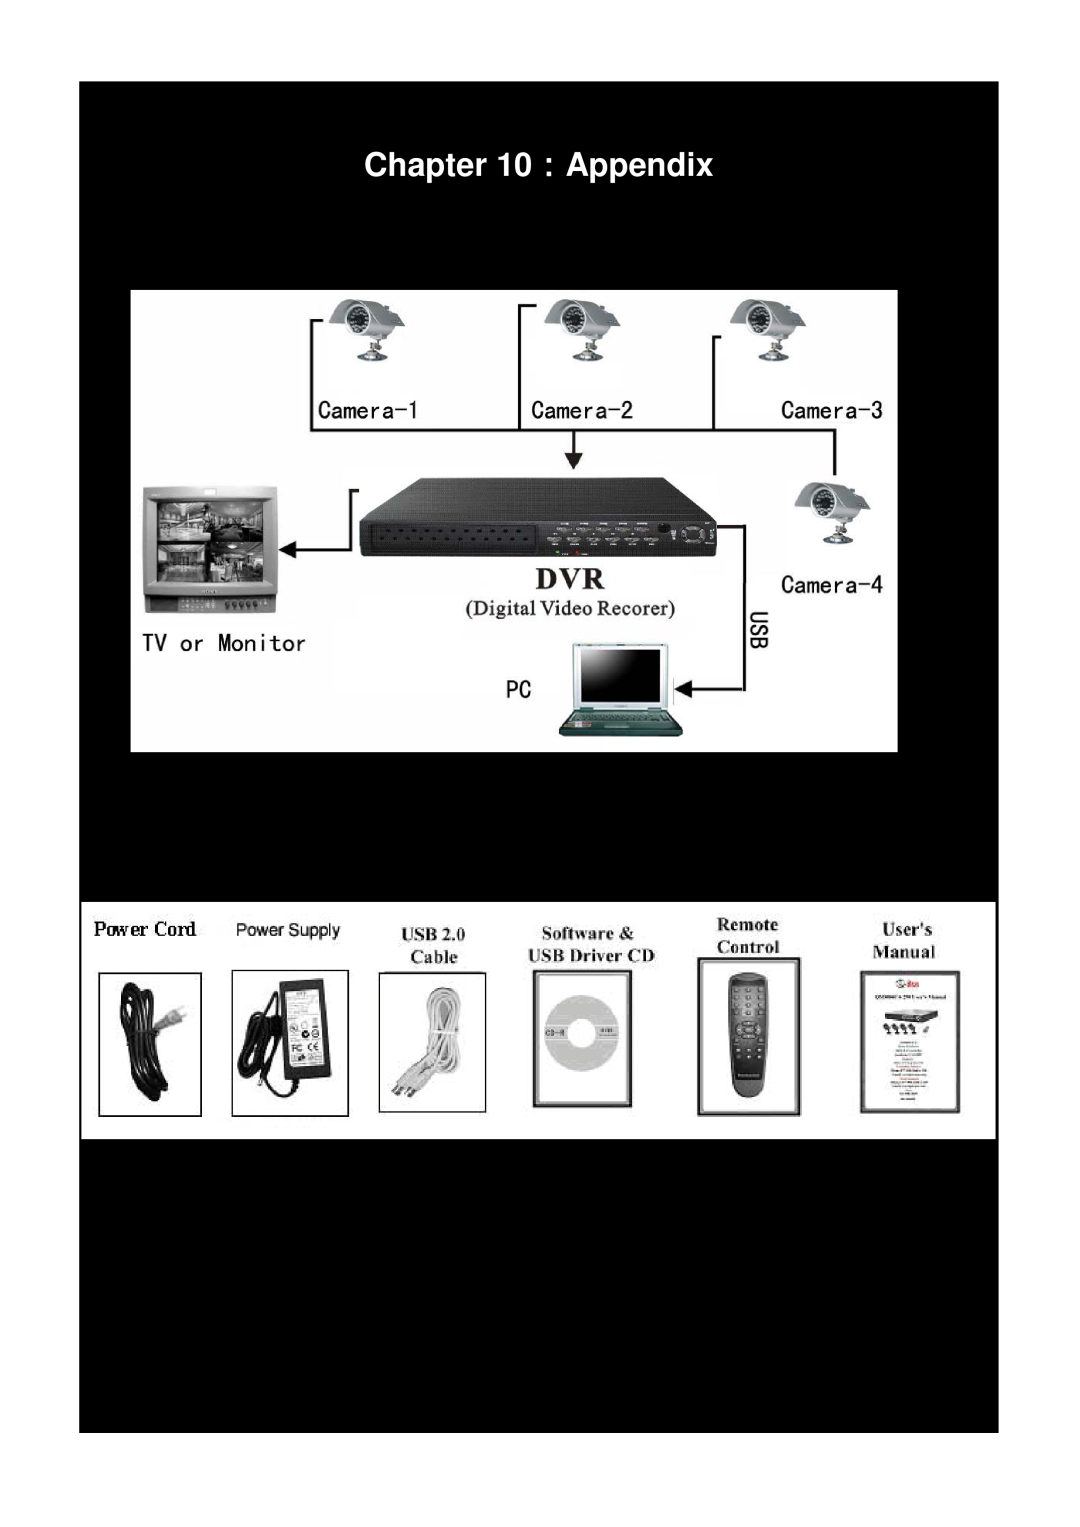 Q-See user manual ：Appendix, System Connection Layout 10.2 Accessories, QSD2014 User’s Manual 